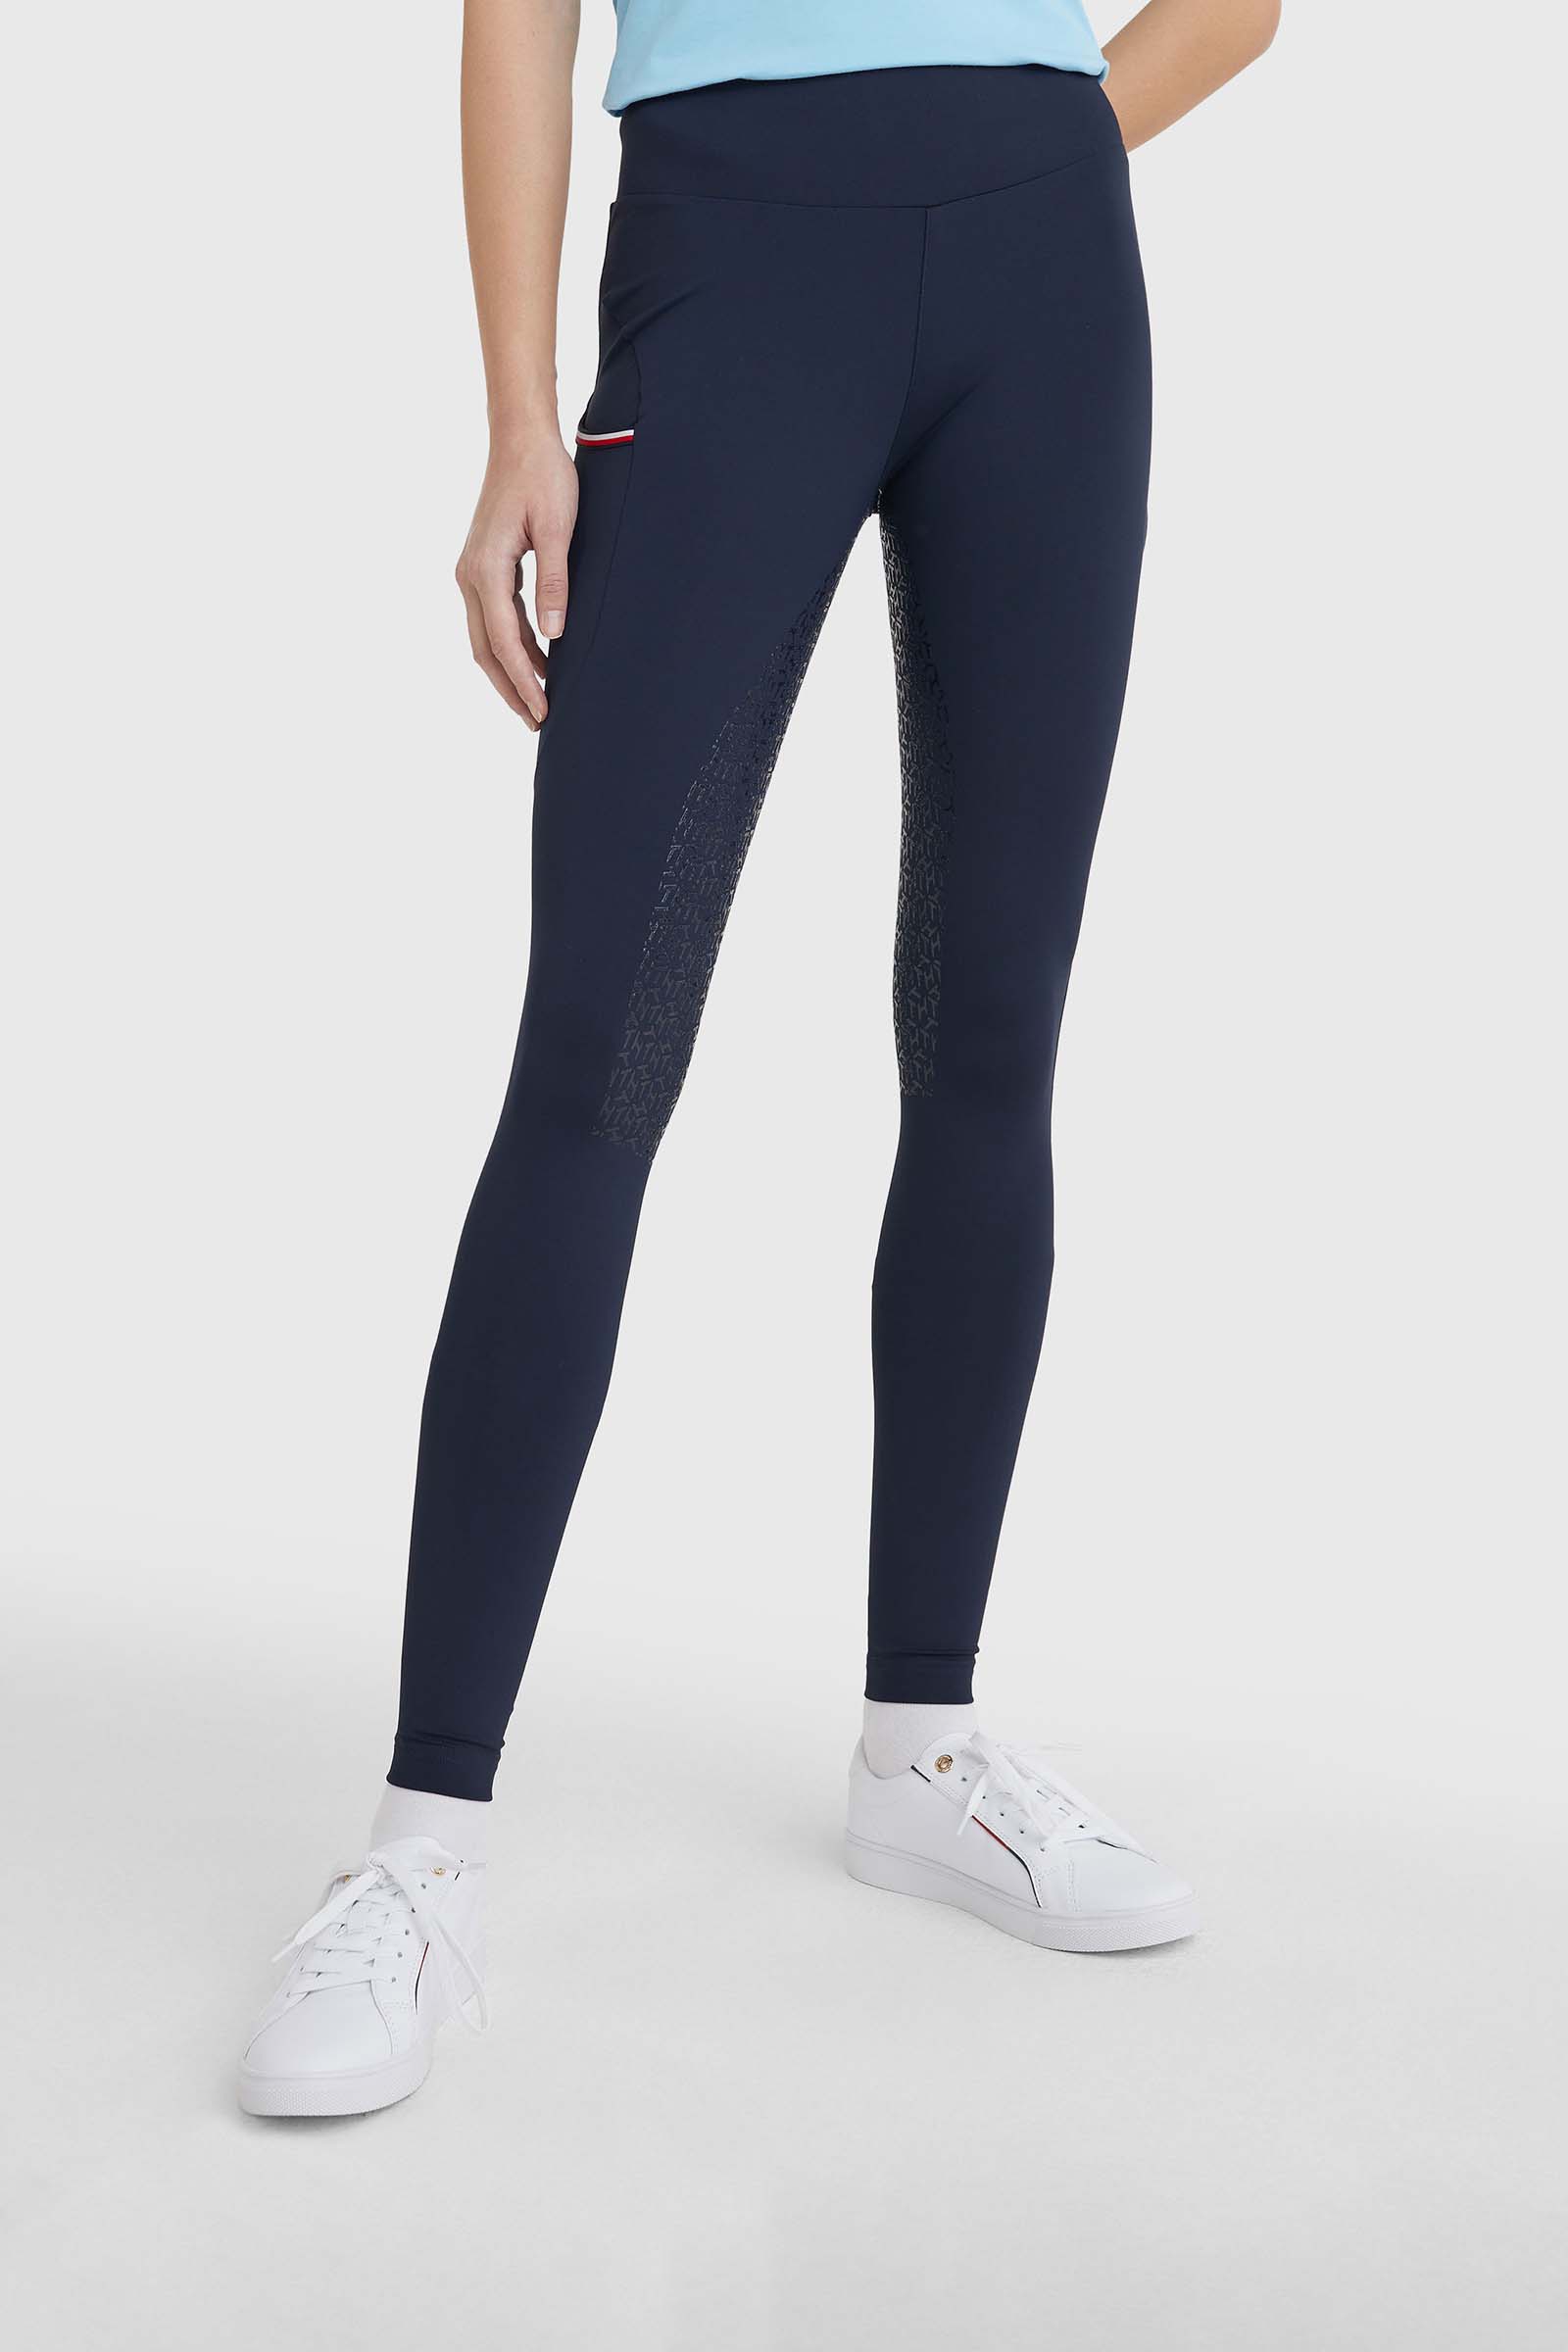 Tommy Hilfiger Equestrian Women's Thermal Riding Leggings Style